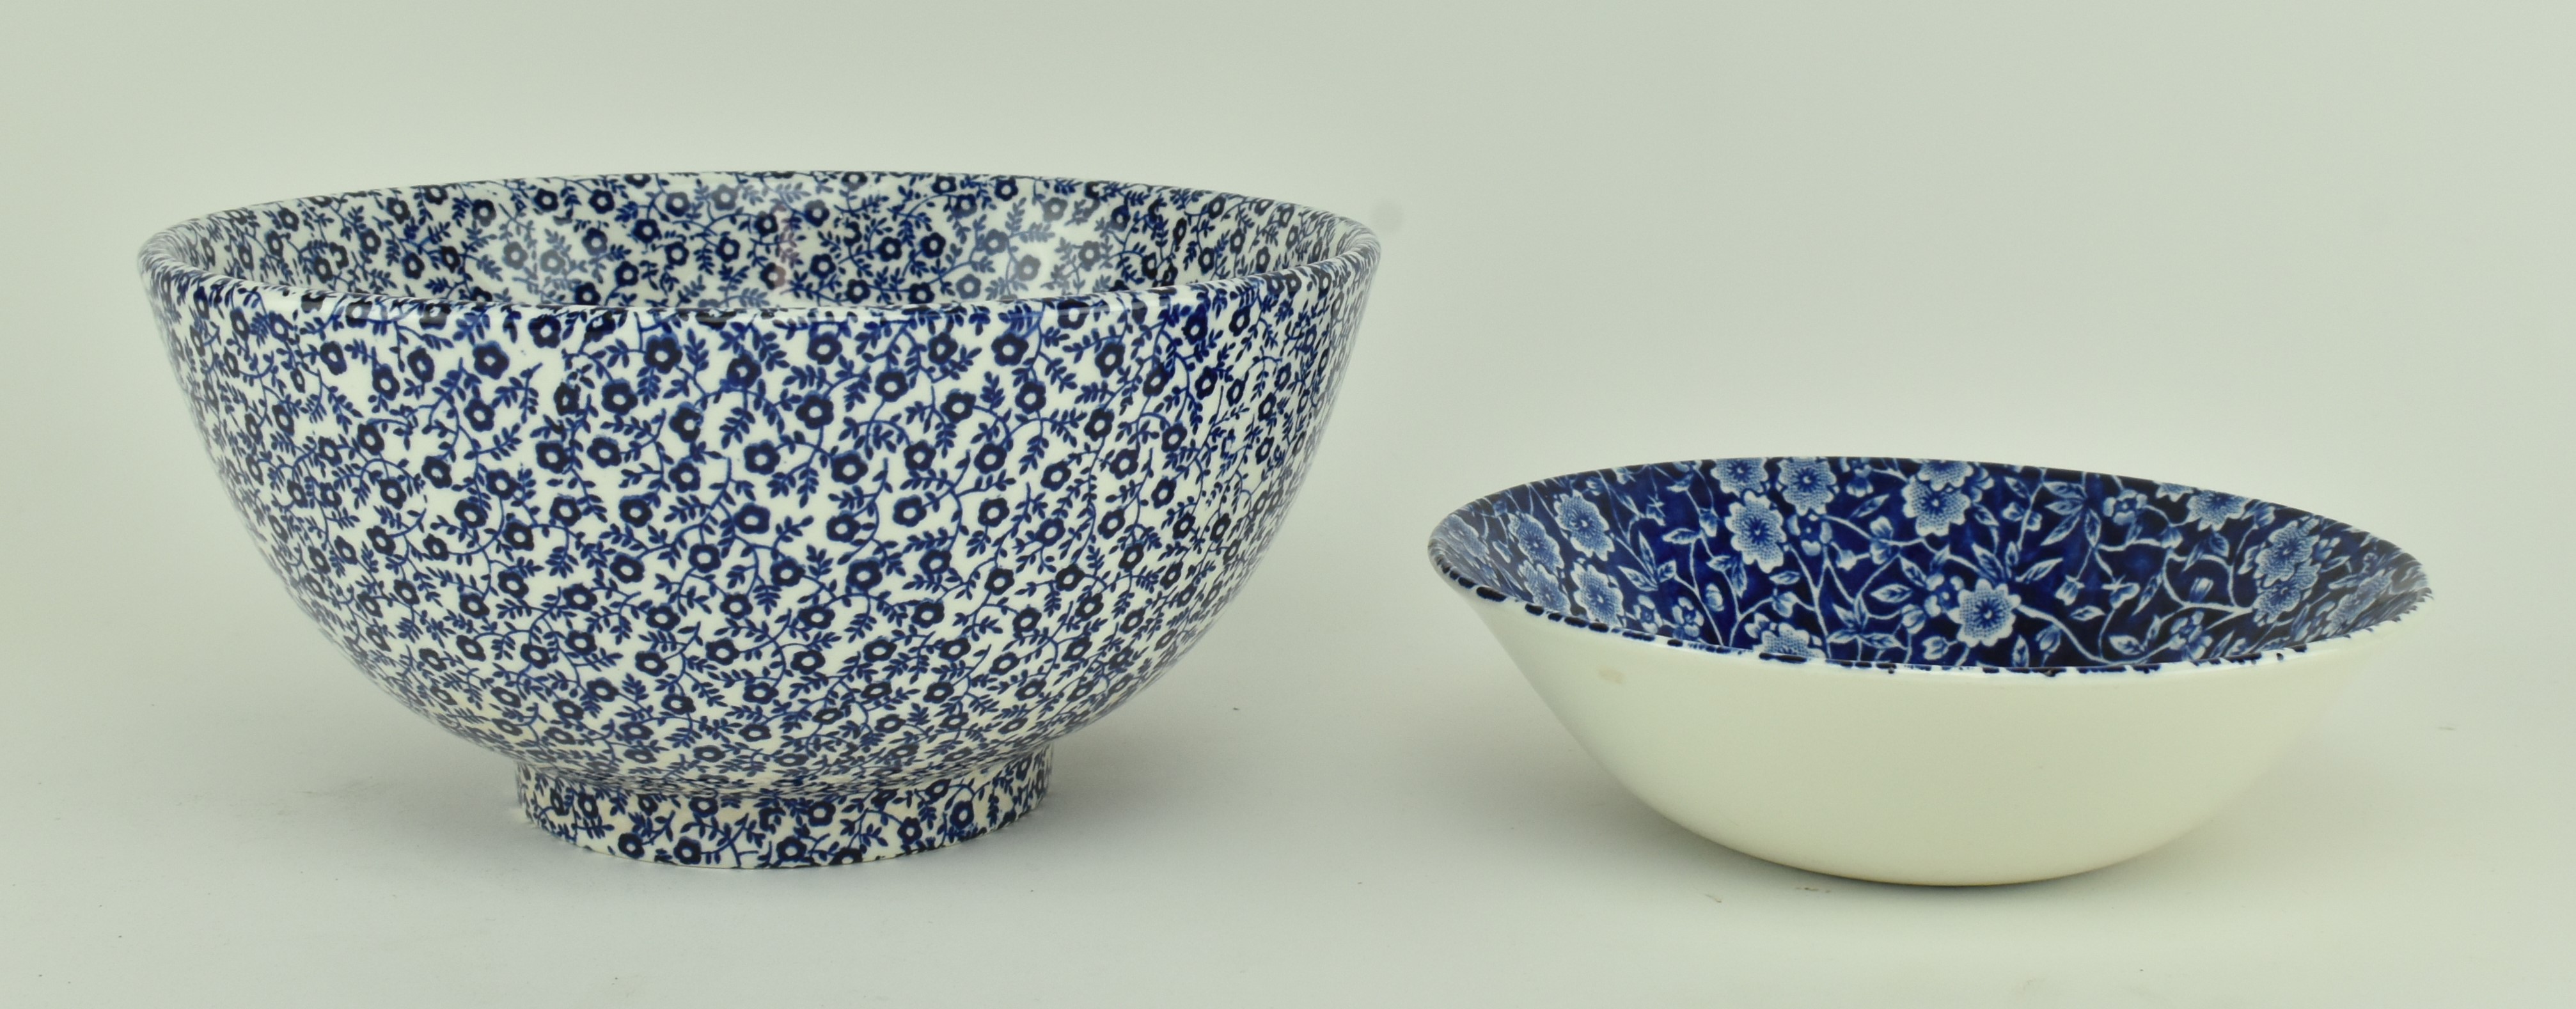 SELECTION OF BLUE AND WHITE BURLEIGH CERAMIC TABLEWARES - Image 12 of 15